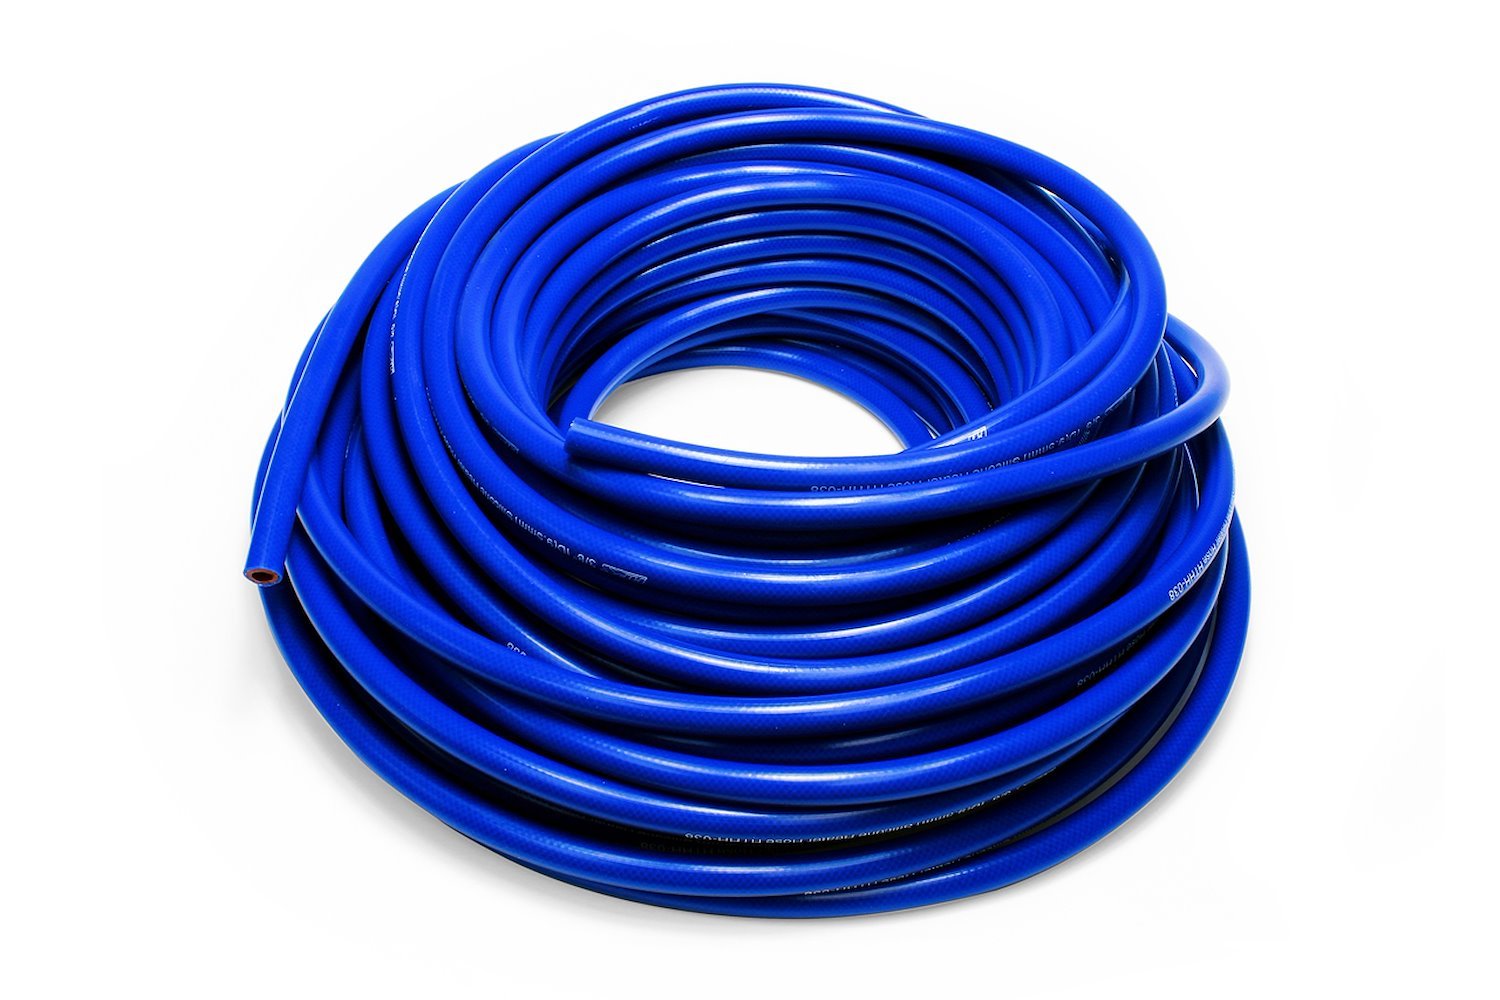 HTHH-016-BLUEx100 Silicone Heater Hose Tubing, High-Temp Reinforced, 5/32 in. ID, 100 ft. Roll, Blue